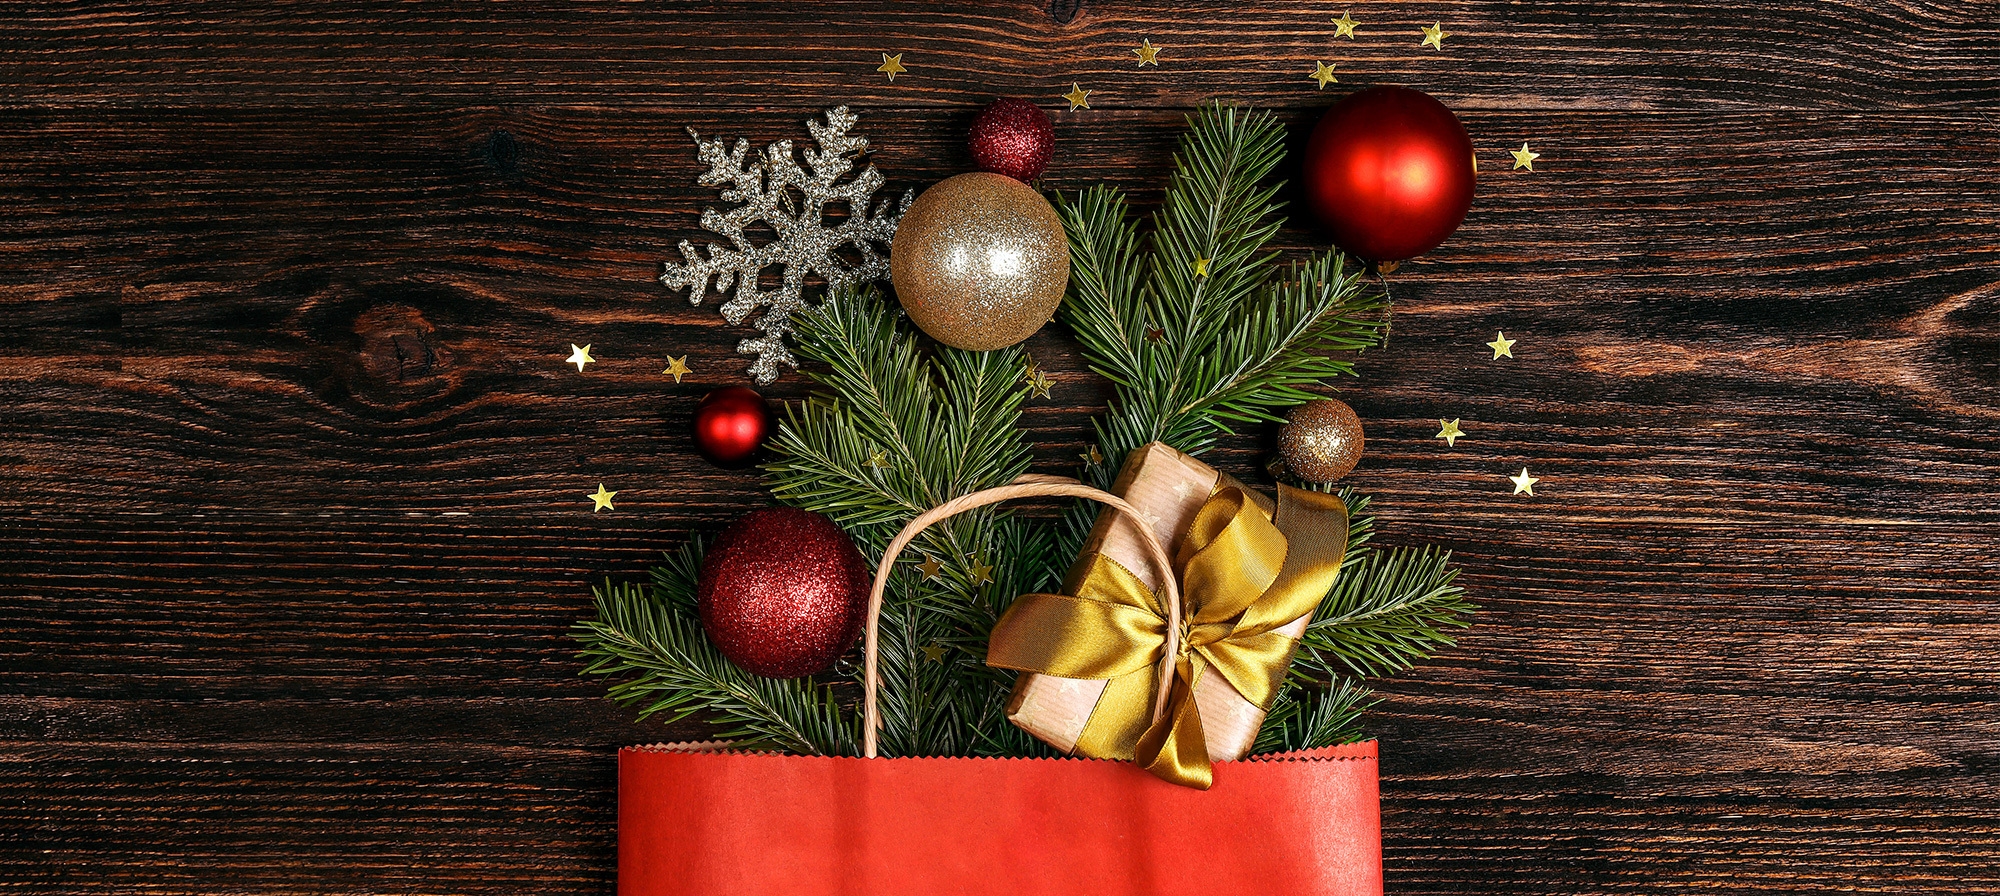 Christmas Goody Bag Ideas for Adults: Holiday Party Favors to Make Grown Ups Feel Like Kids